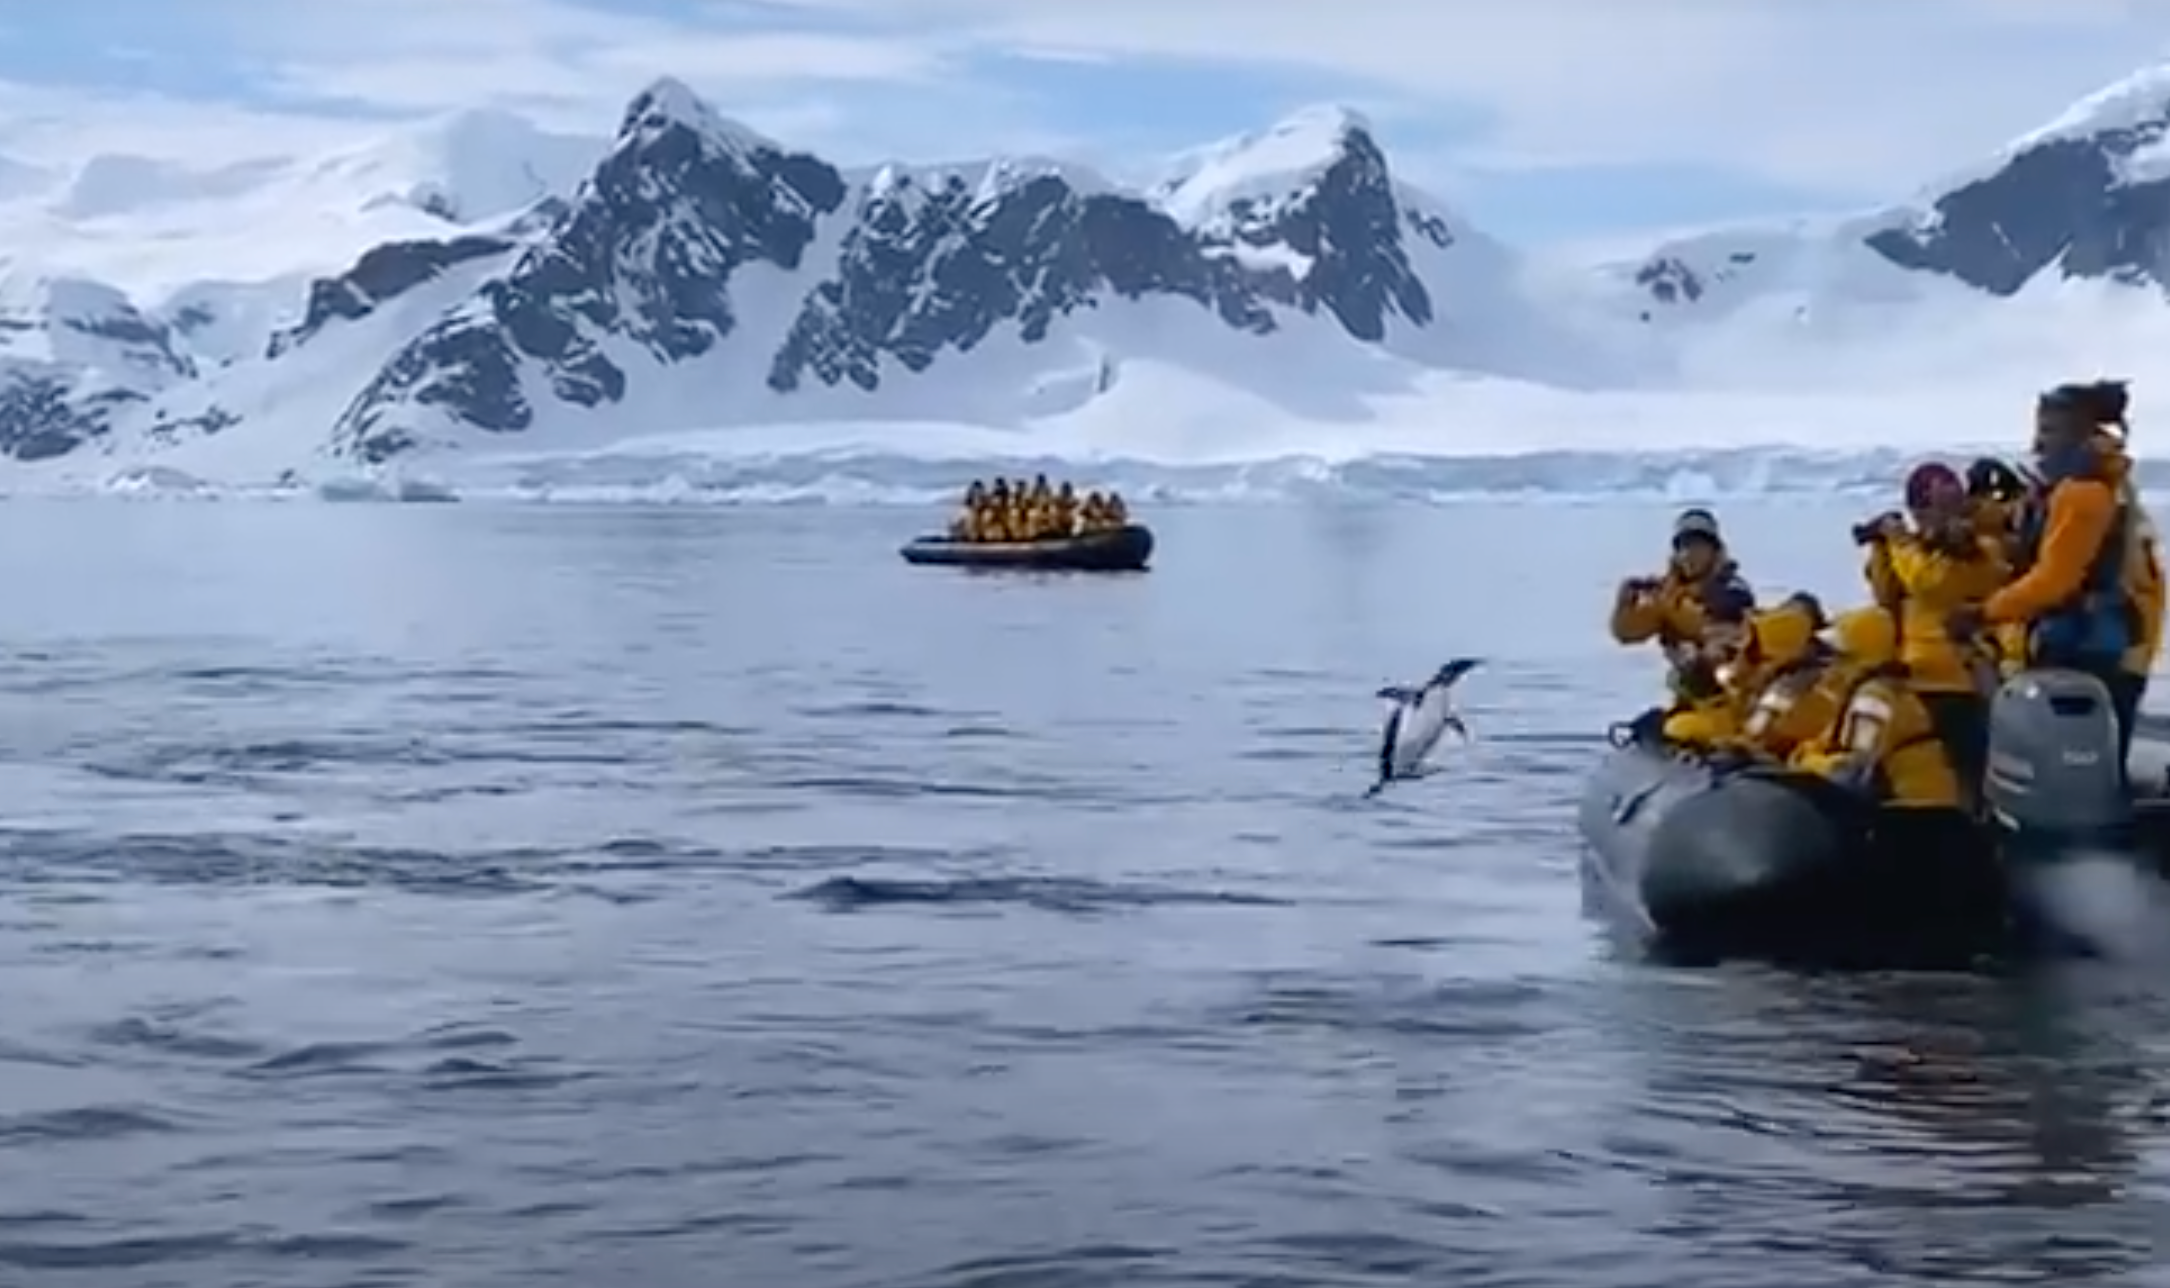 The penguin made several attempt to jump aboard the dinghy